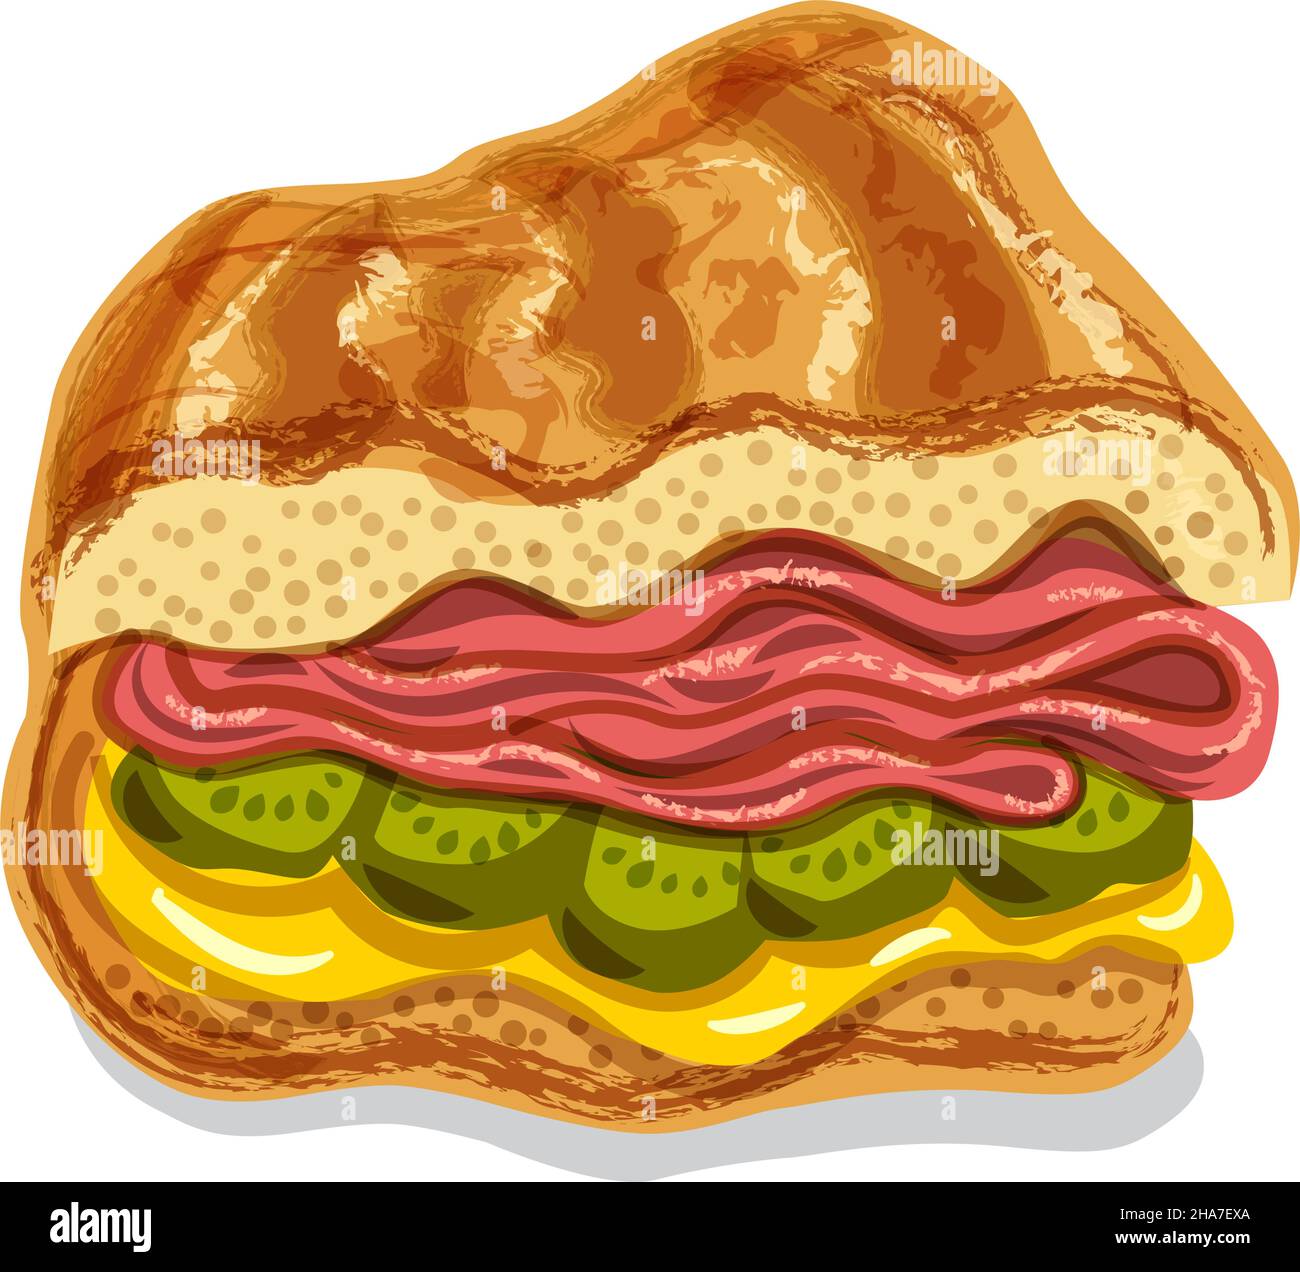 Illustration of the cuban sandwich with a ham, cheese and pickled cucumbers Stock Vector